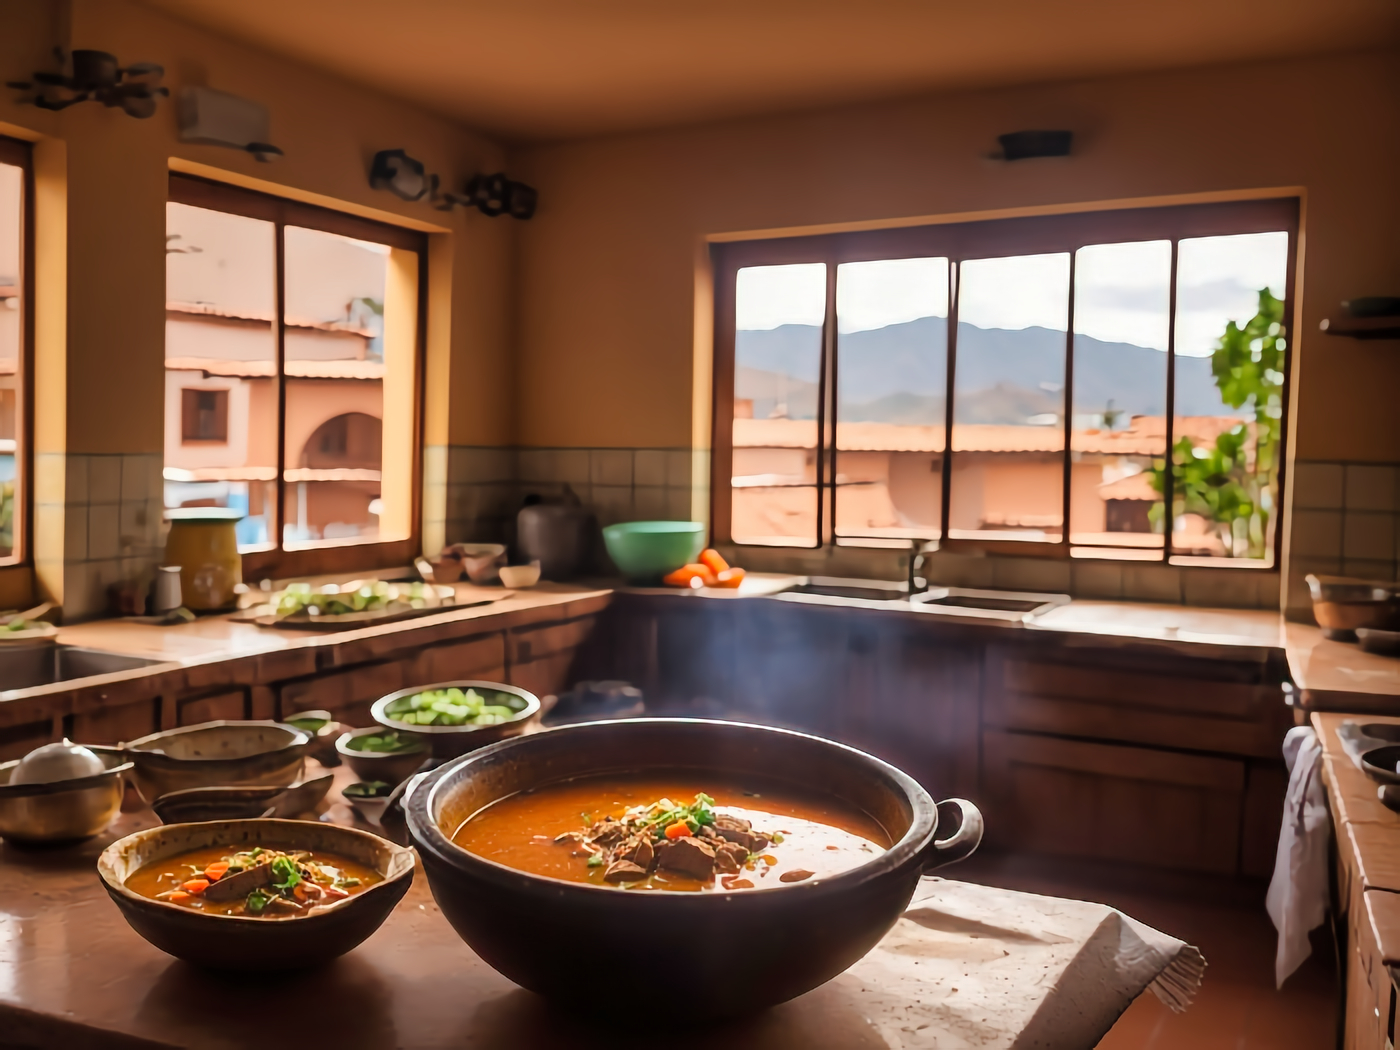 8. Fricassée (Spicy Bolivian-Style Pork Soup) - Bolivian food traditions